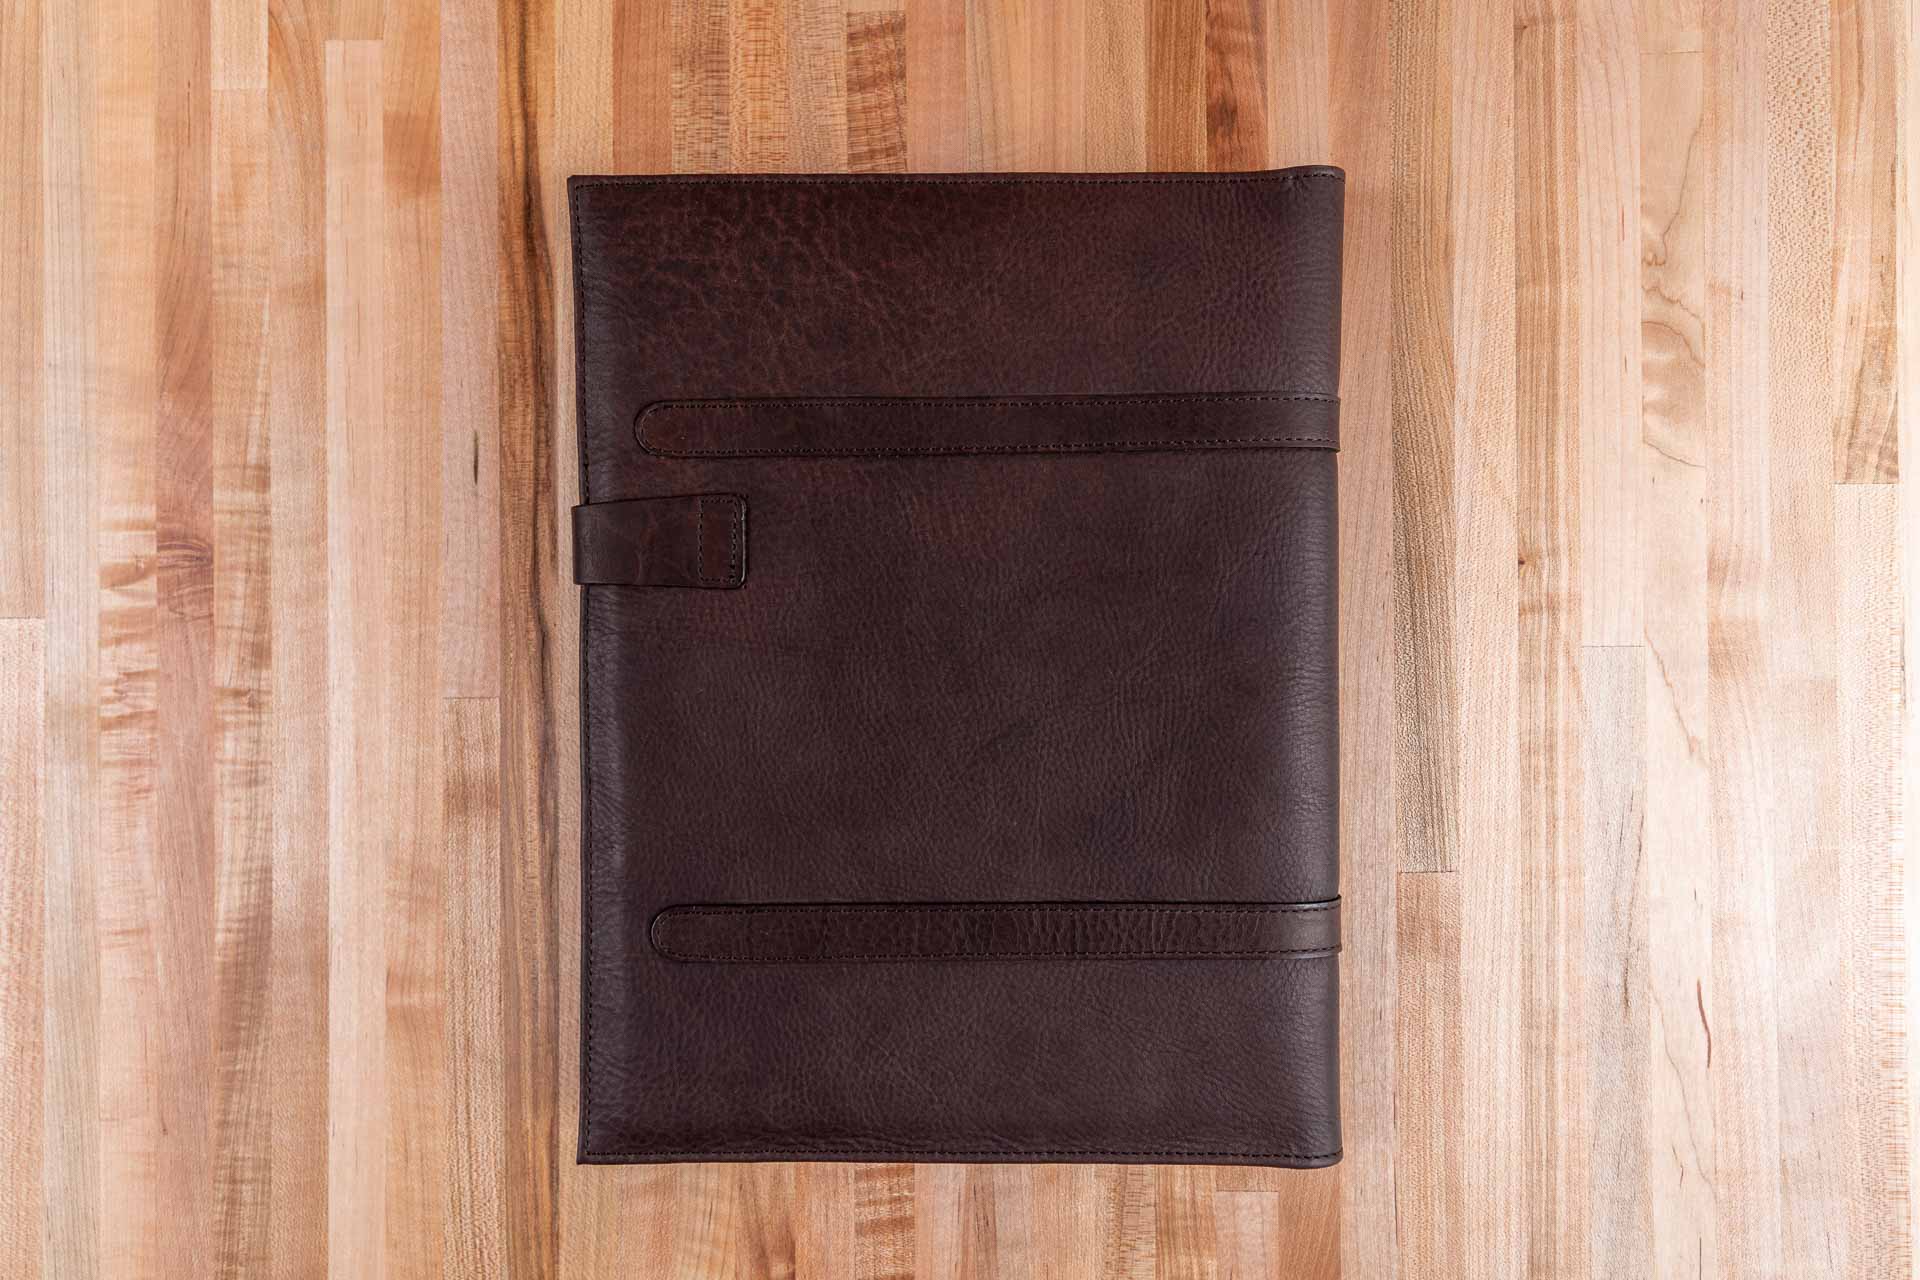 Bespoke Hand Stitched Pad Cover | English Bridle Hide | Portfolio for Legal  Pad | Custom Made in England